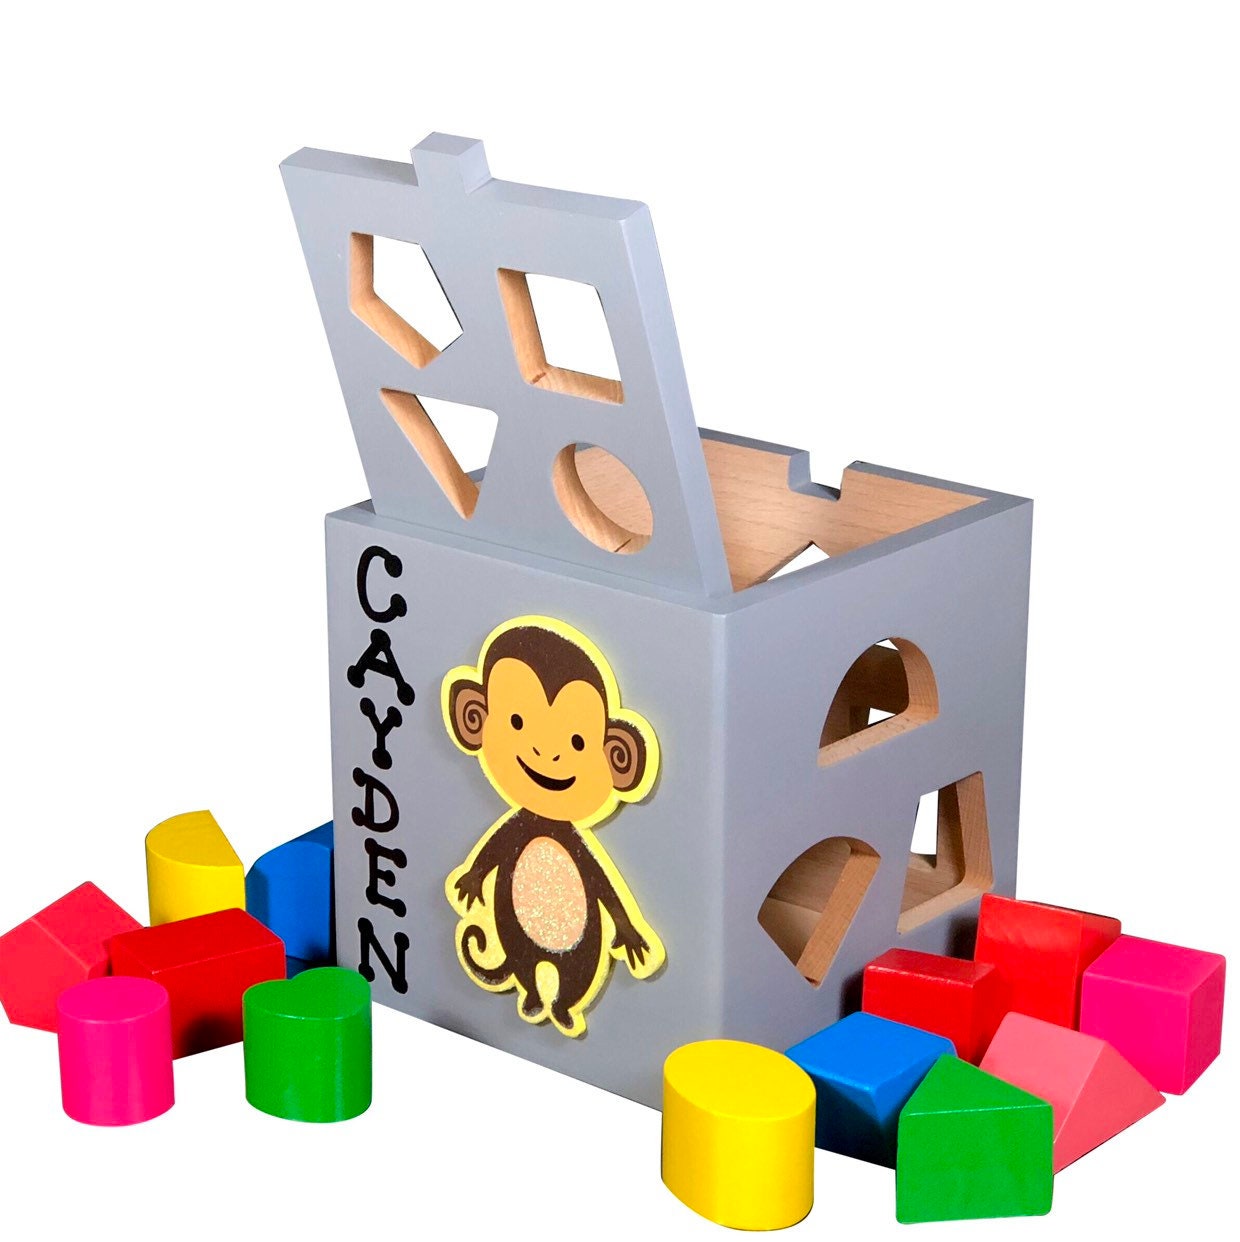 Monkey wooden baby toys / handmade toys in USA